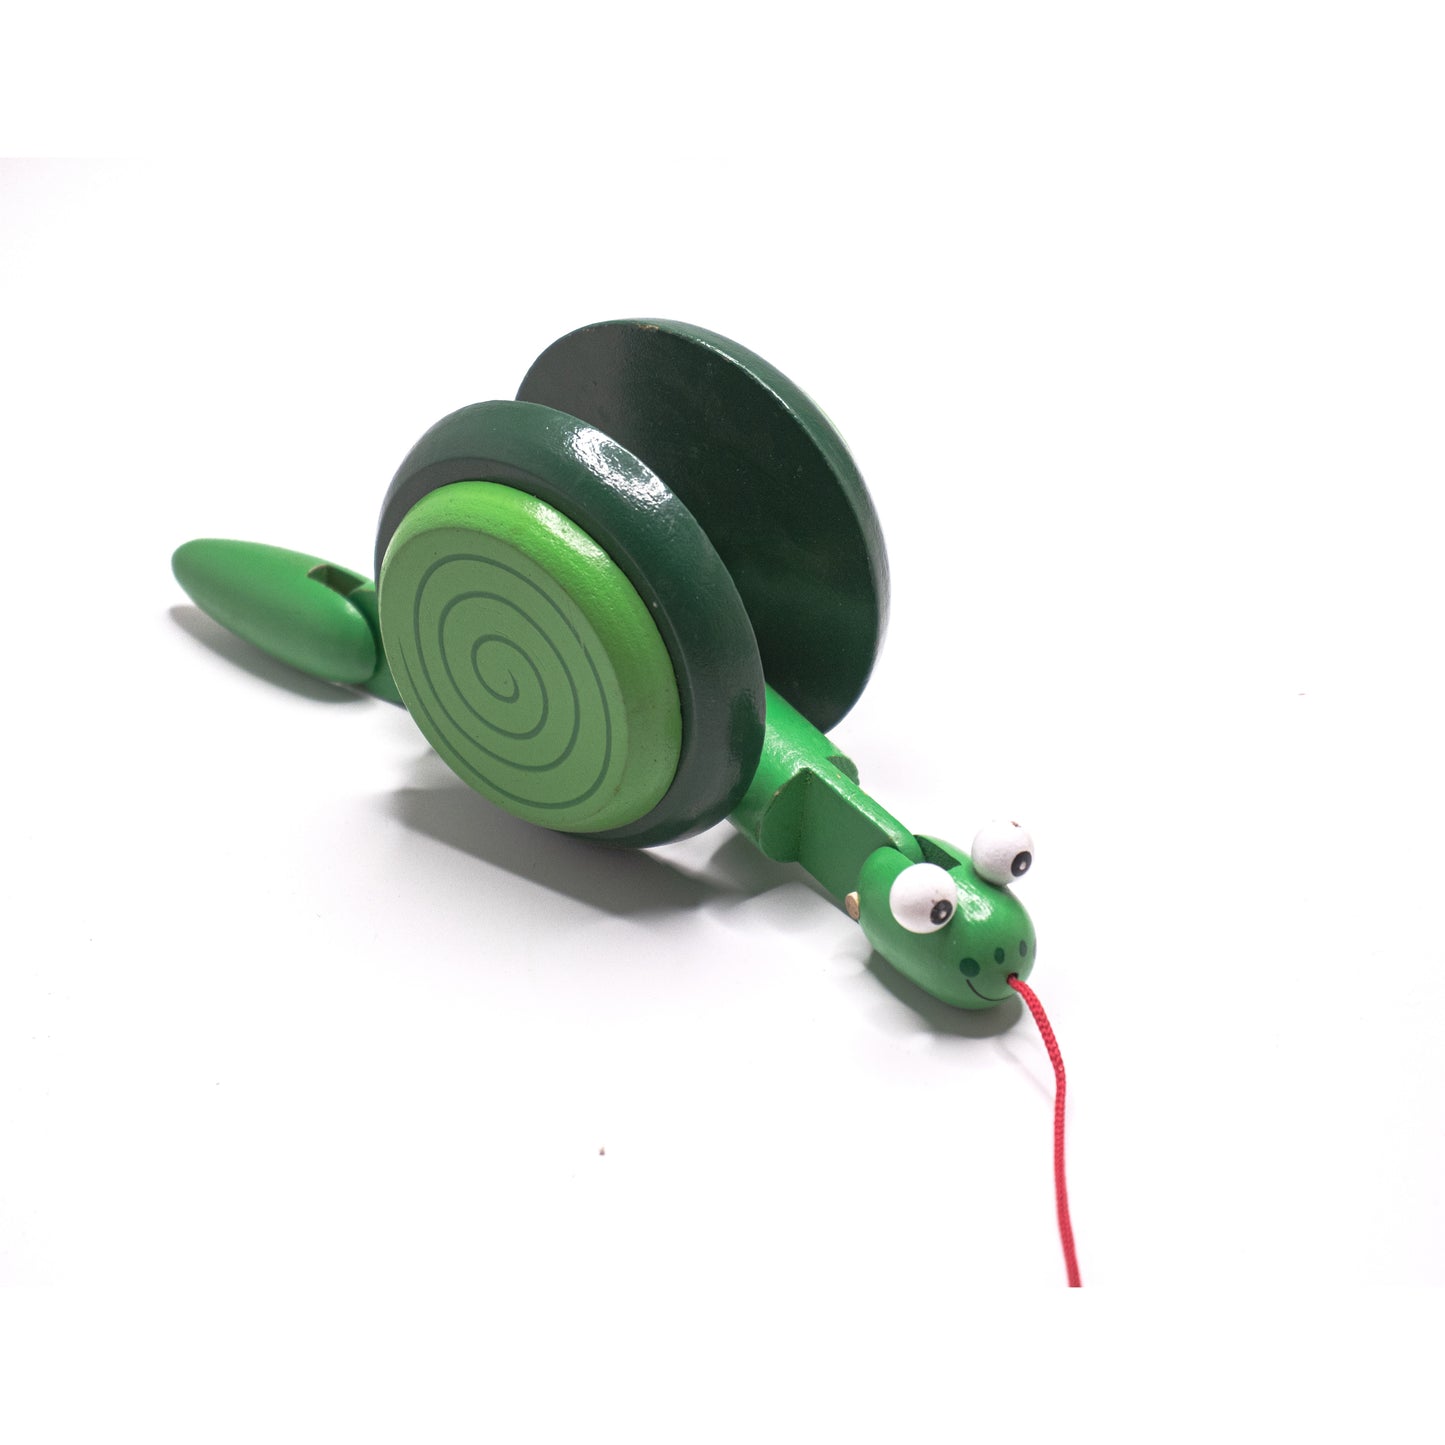 Handmade Wooden PULL ALONG SNAIL Toy - Fun for kids